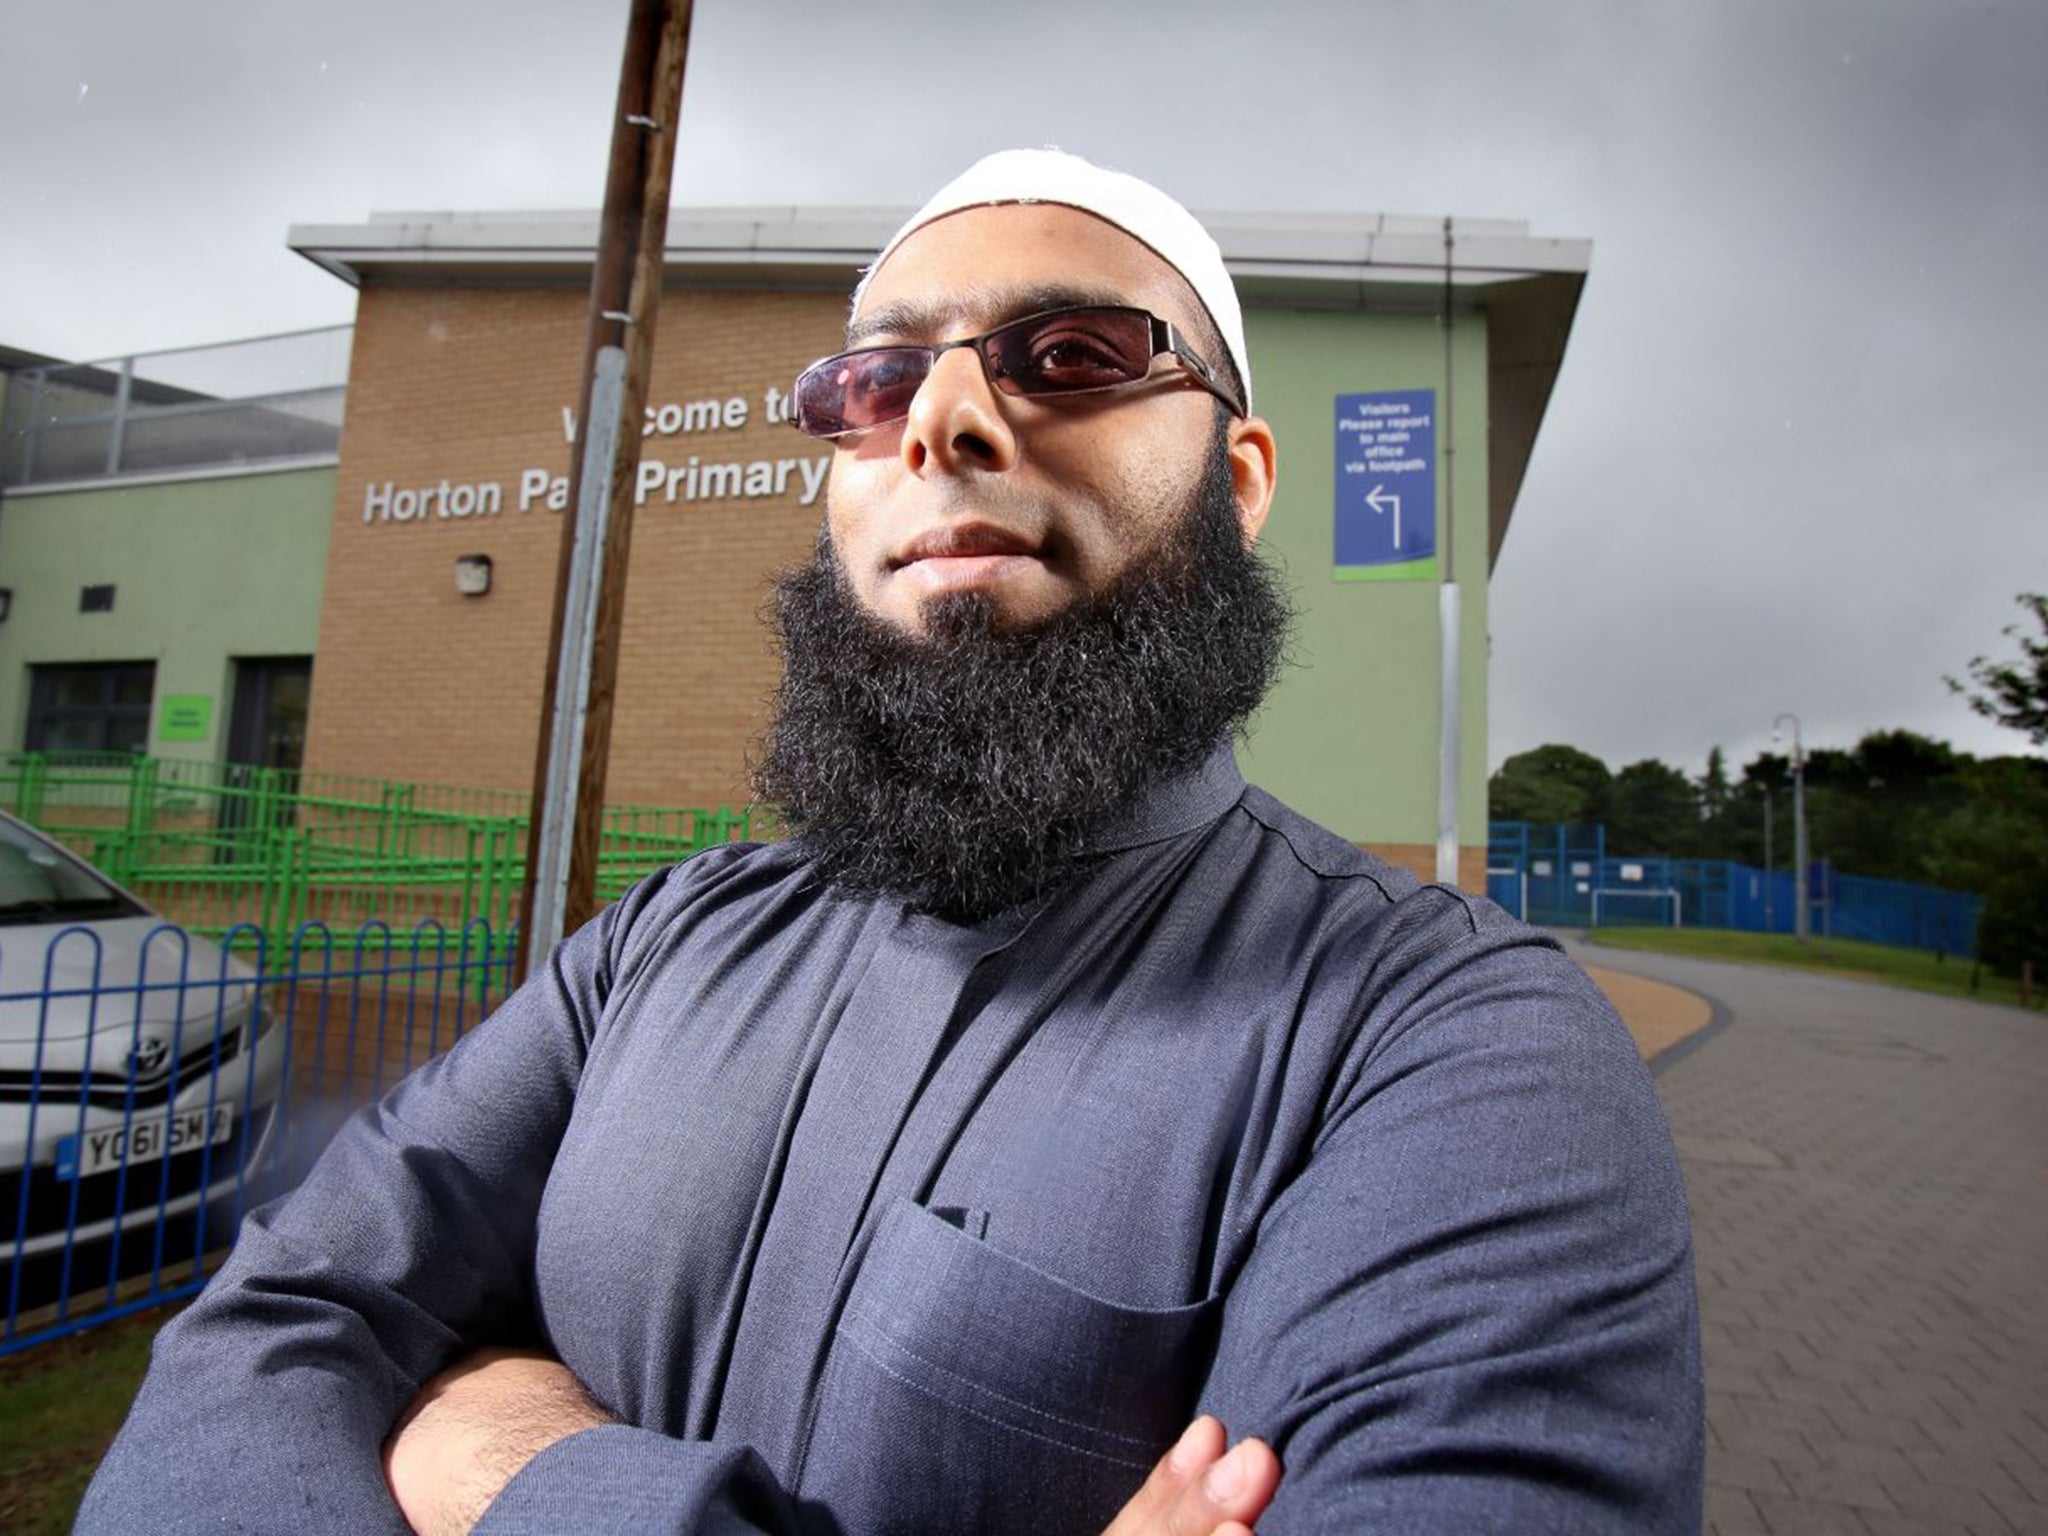 Saleh Patel is one of the few Arabic teachers working full-time in a British primary school